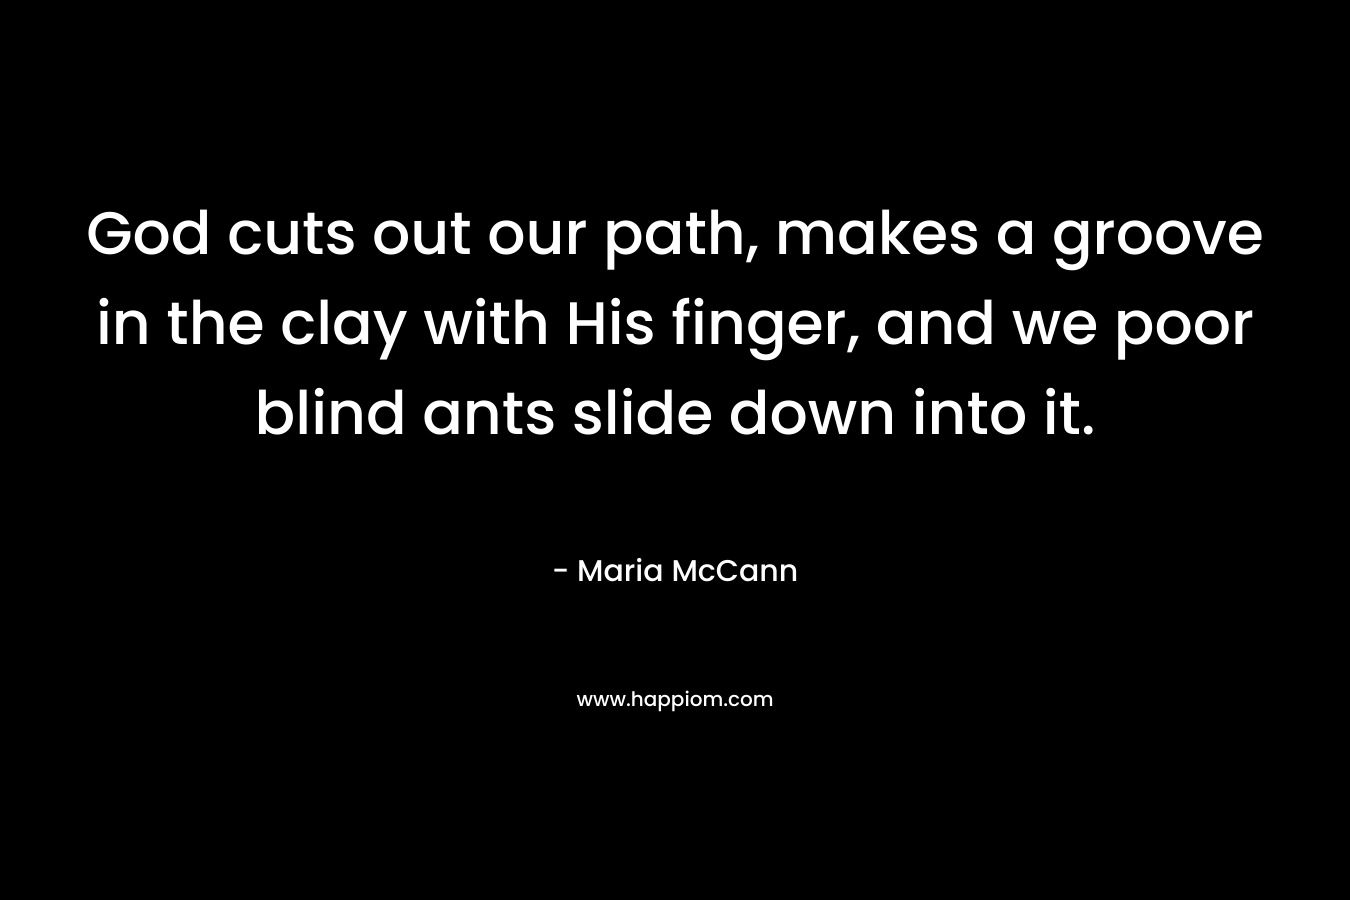 God cuts out our path, makes a groove in the clay with His finger, and we poor blind ants slide down into it. – Maria McCann